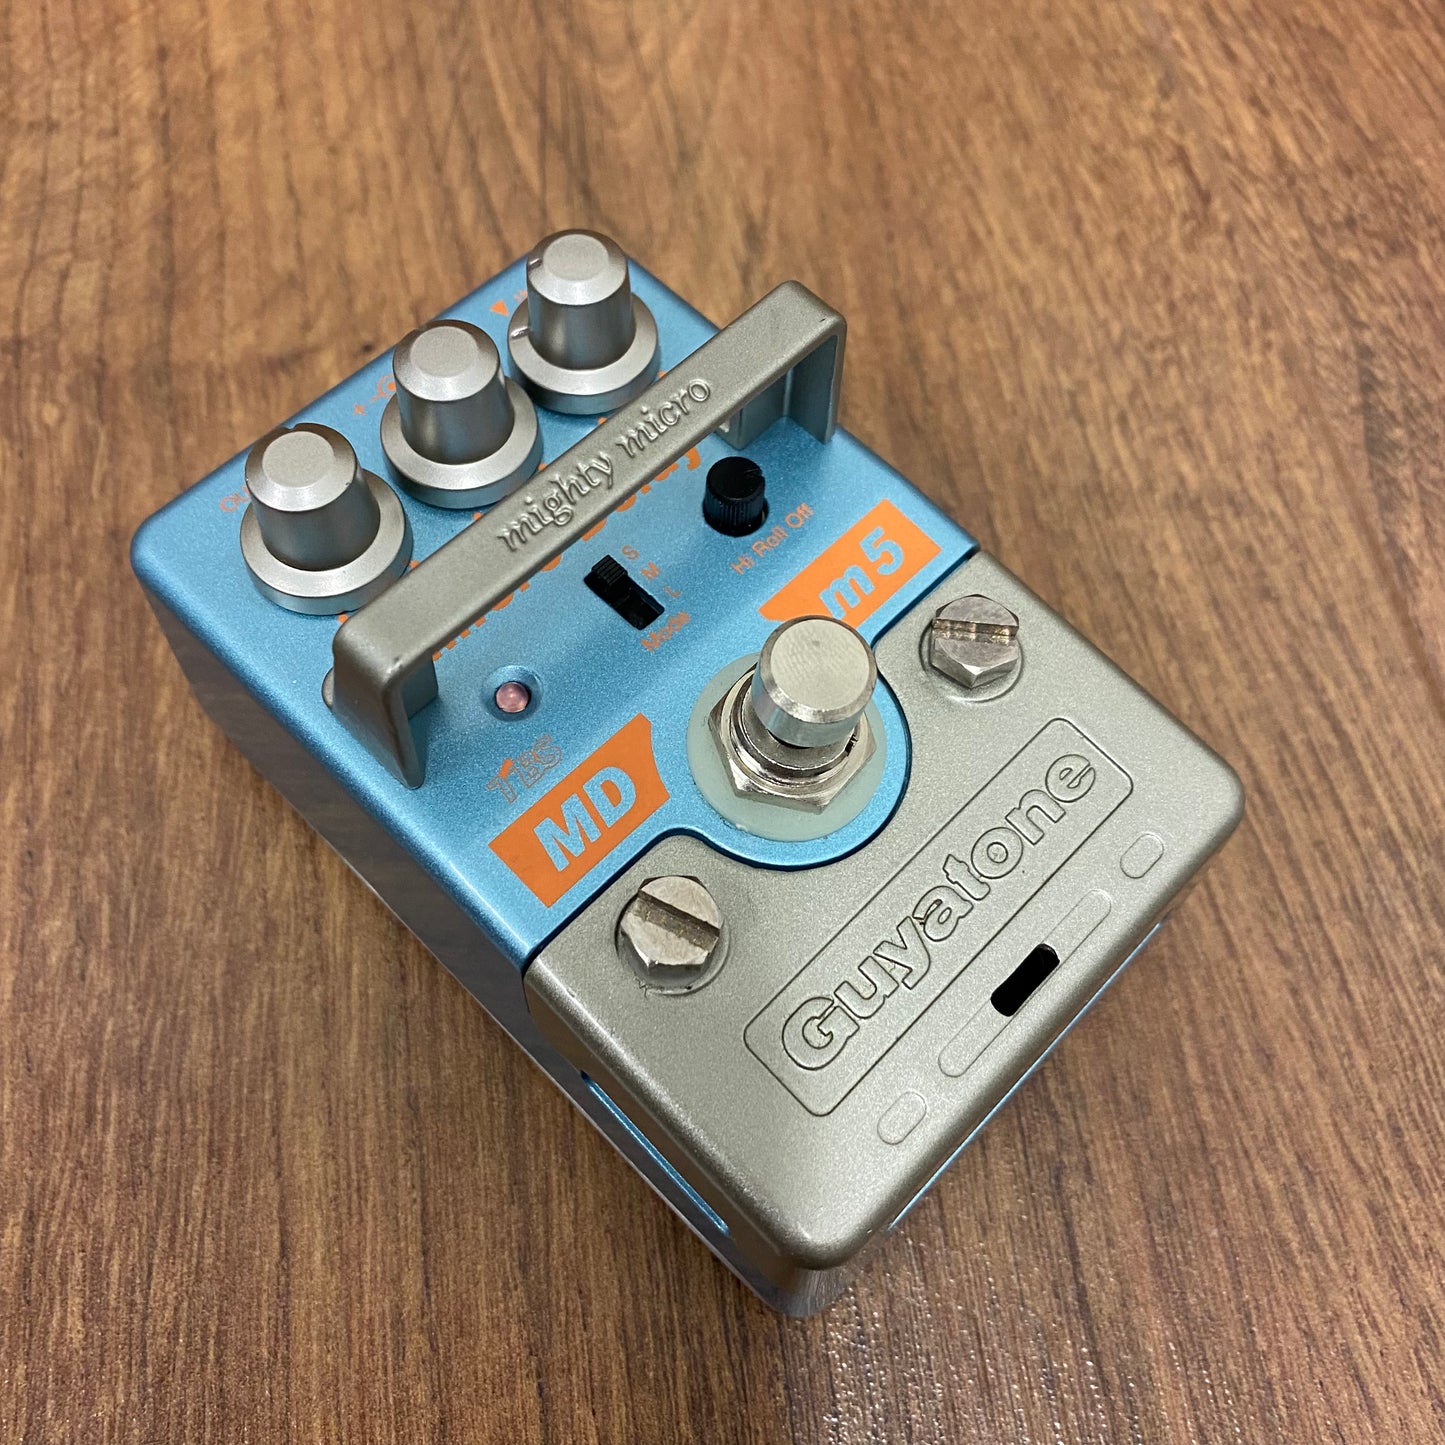 Pre-Owned Guyatone MDm5 Mighty Micro Delay Pedal